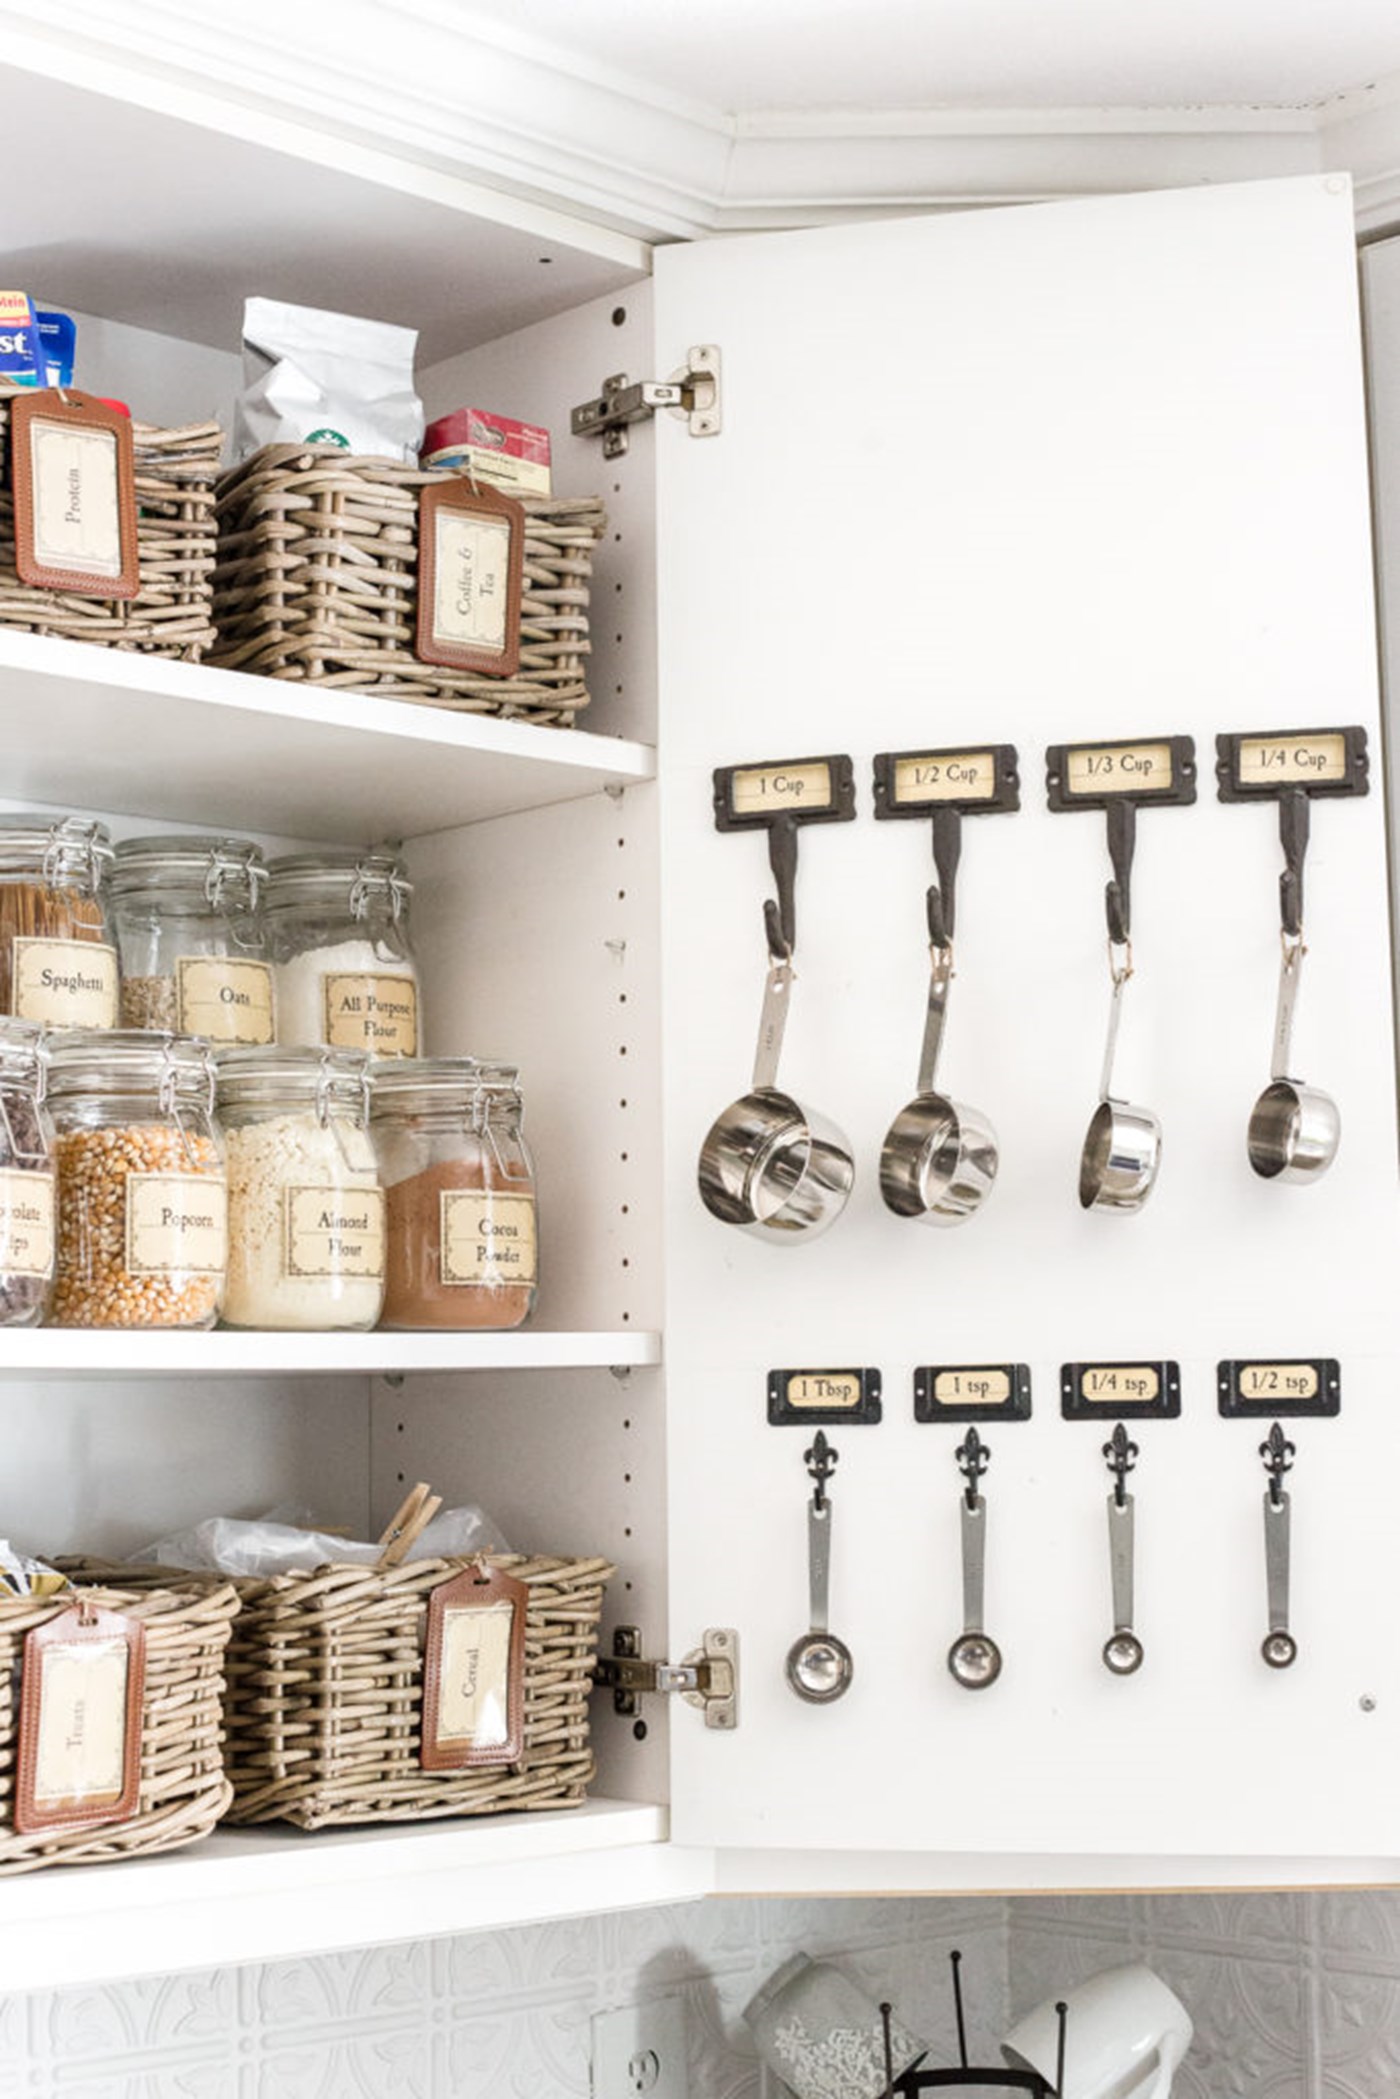 The Best Pinterest Pantry Organisation Ideas to Get Your Kitchen ...